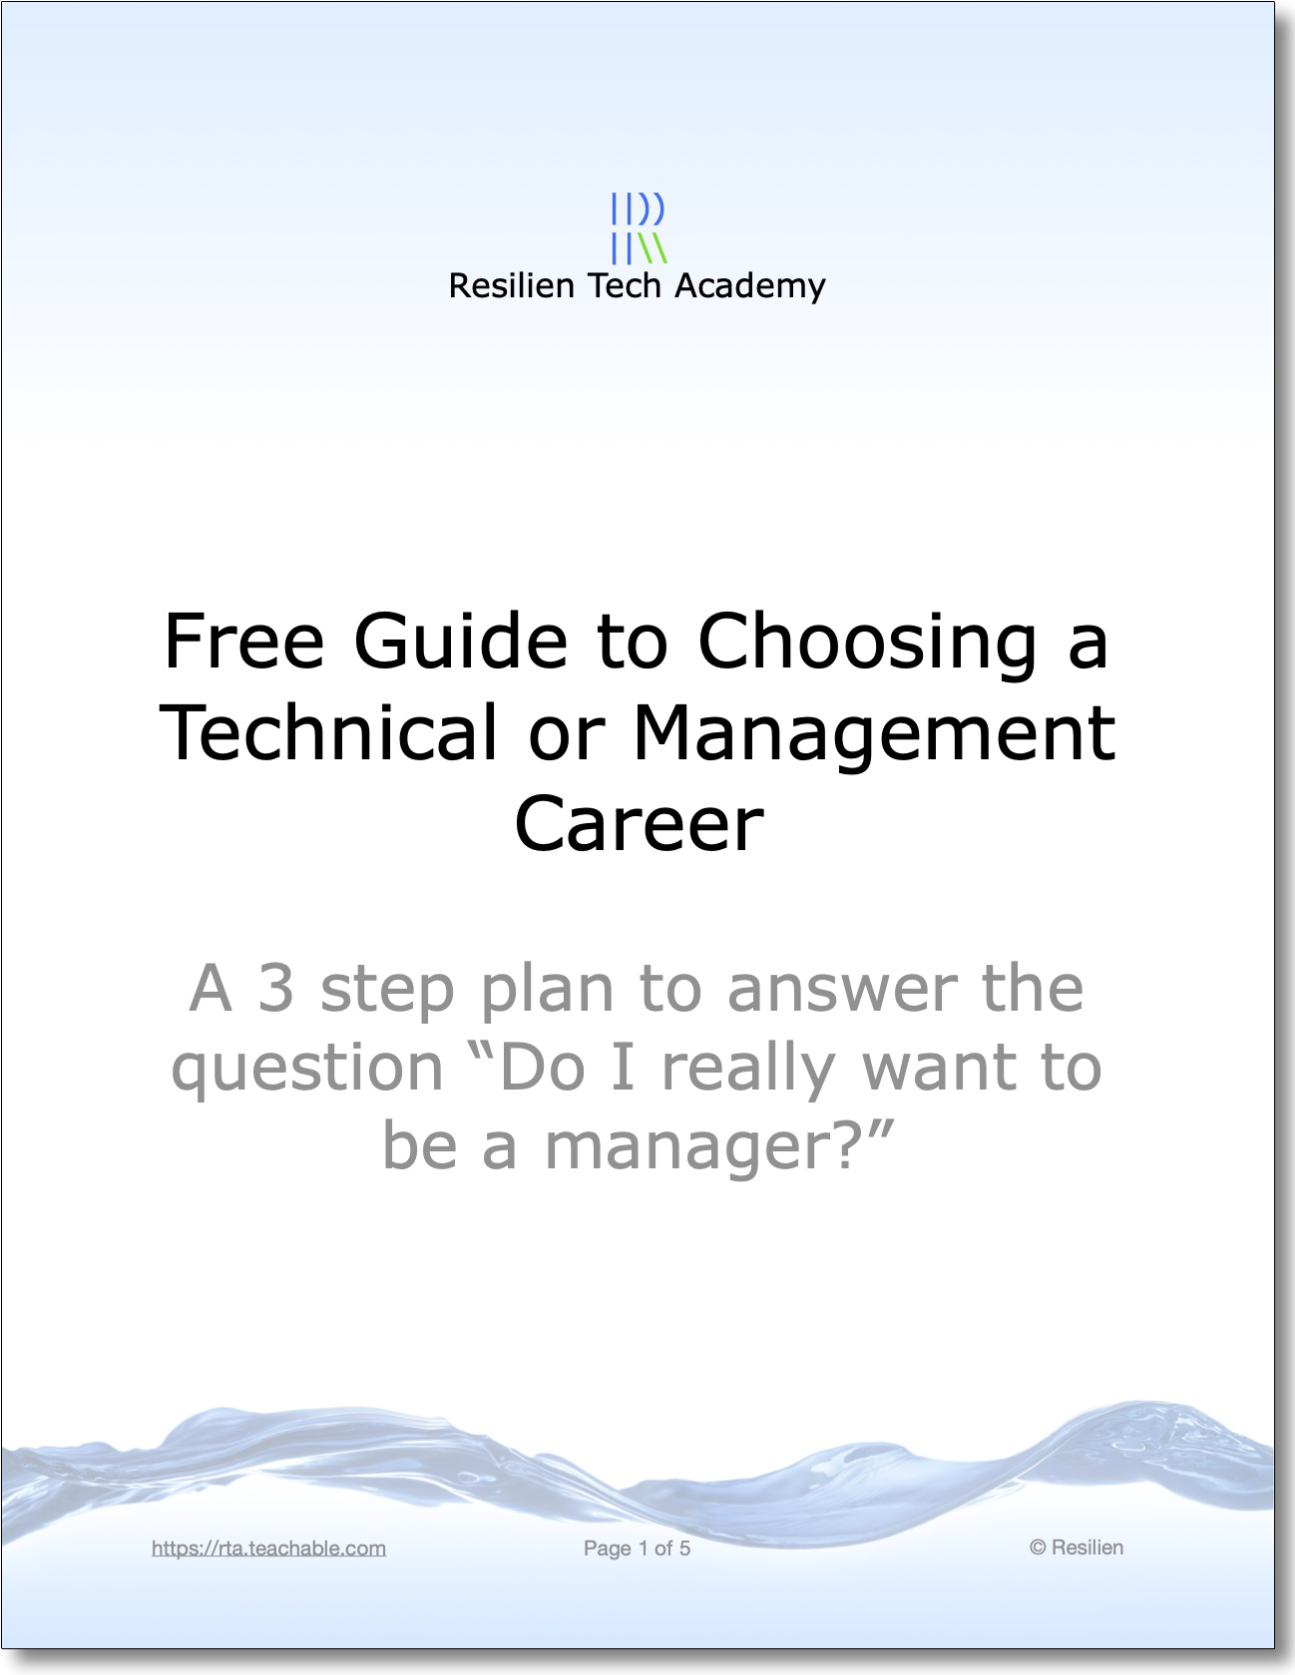 workbook - free guide to choosing a technical or management career.jpeg